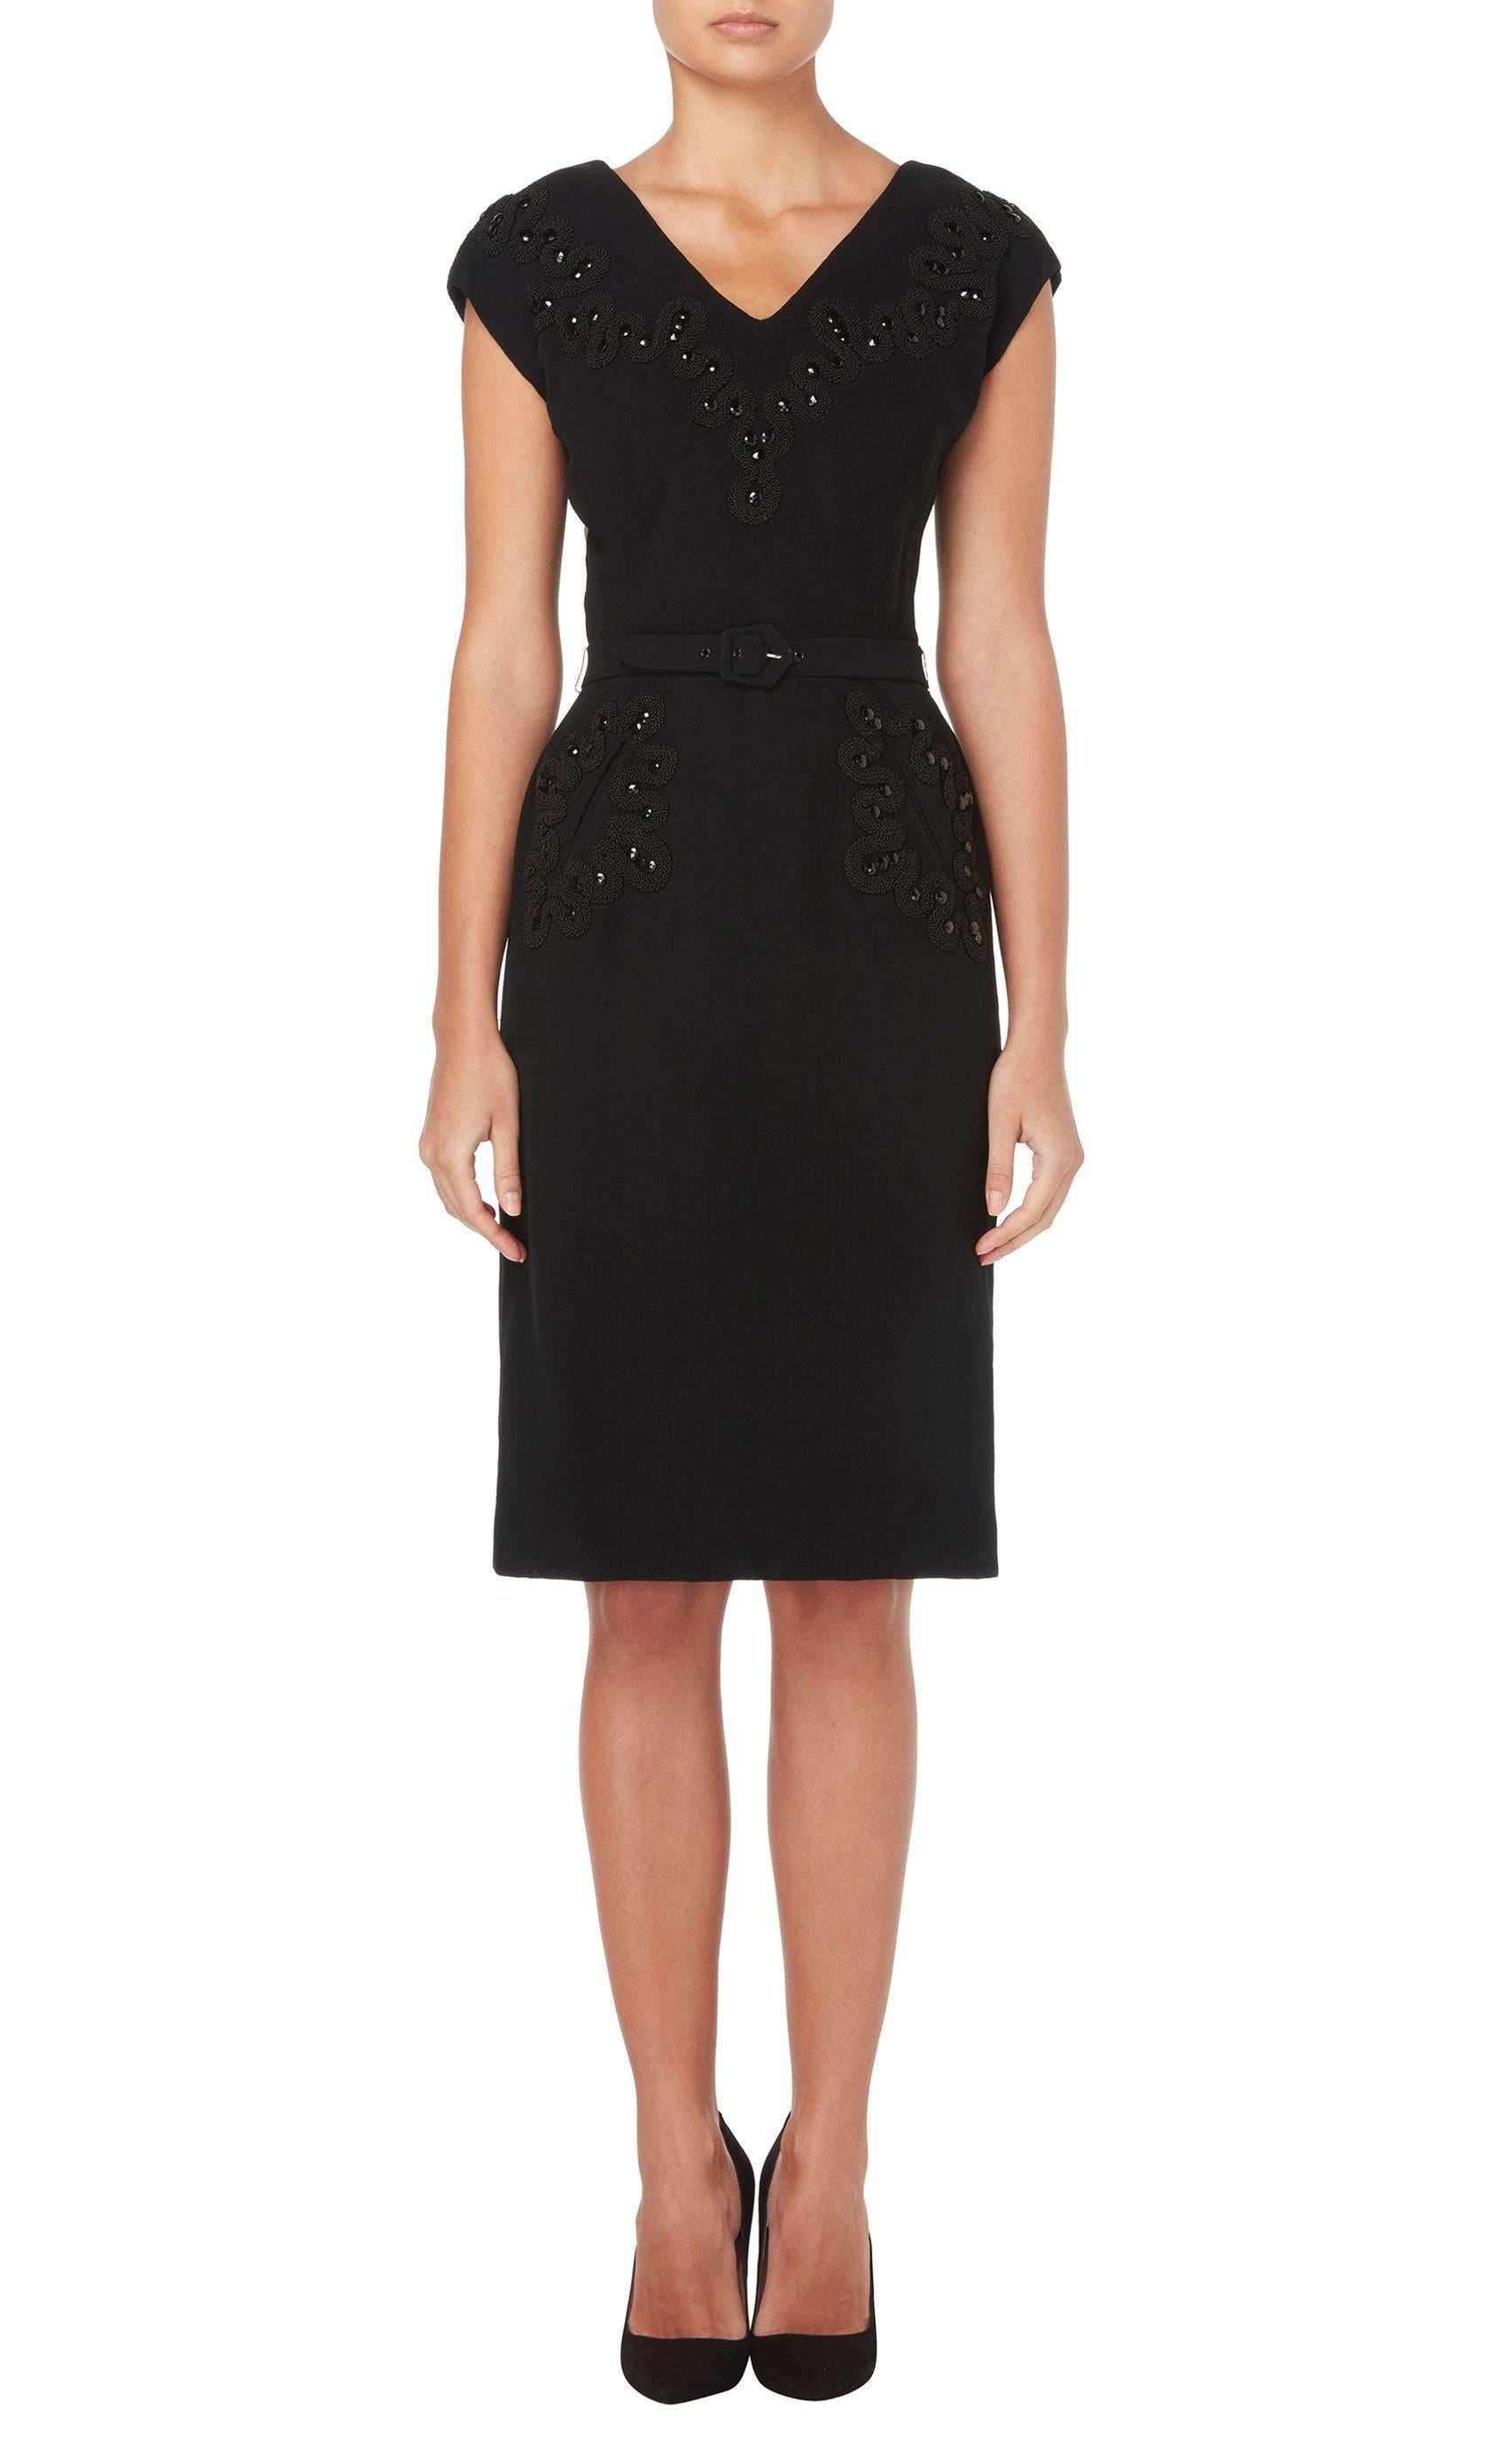 This stunning Balenciaga little black dress will make a fantastic addition to a modern wardrobe. Constructed in black wool crepe, the dress features a deep v-neckline and capped sleeves. The fabric-matched belt draws attention to the waist, while